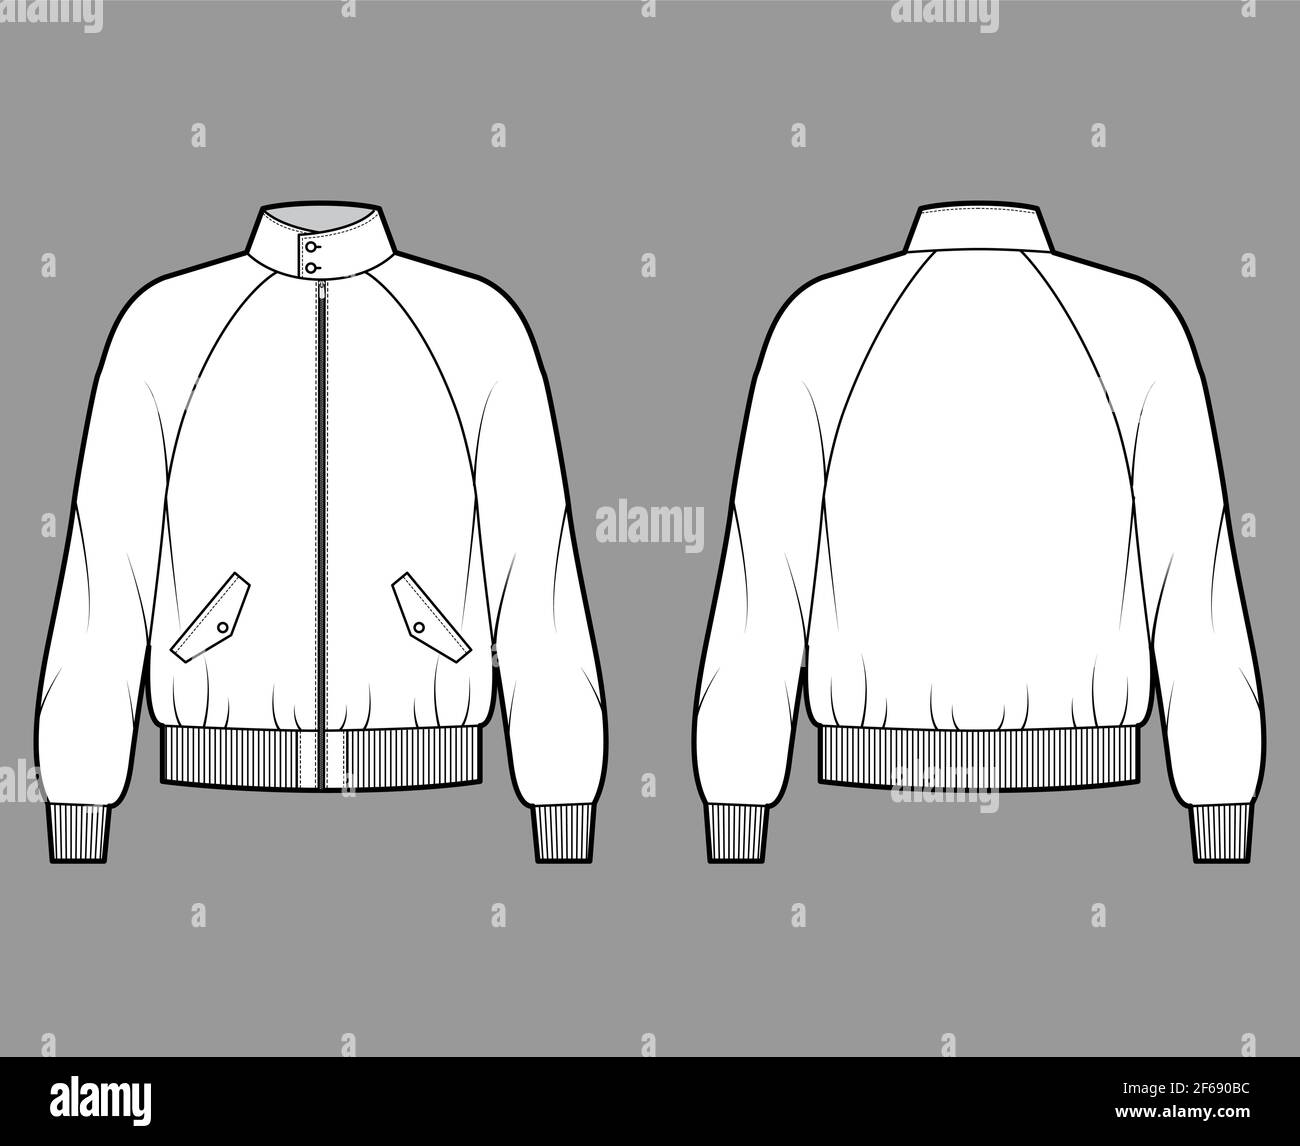 Zip Up Harrington Bomber Jacket Technical Fashion Illustration With Rib Cuffs Oversized Long Raglan Sleeves Flap Pockets Flat Coat Template Front Back White Color Women Men Unisex Top Cad Mockup Stock Vector Image